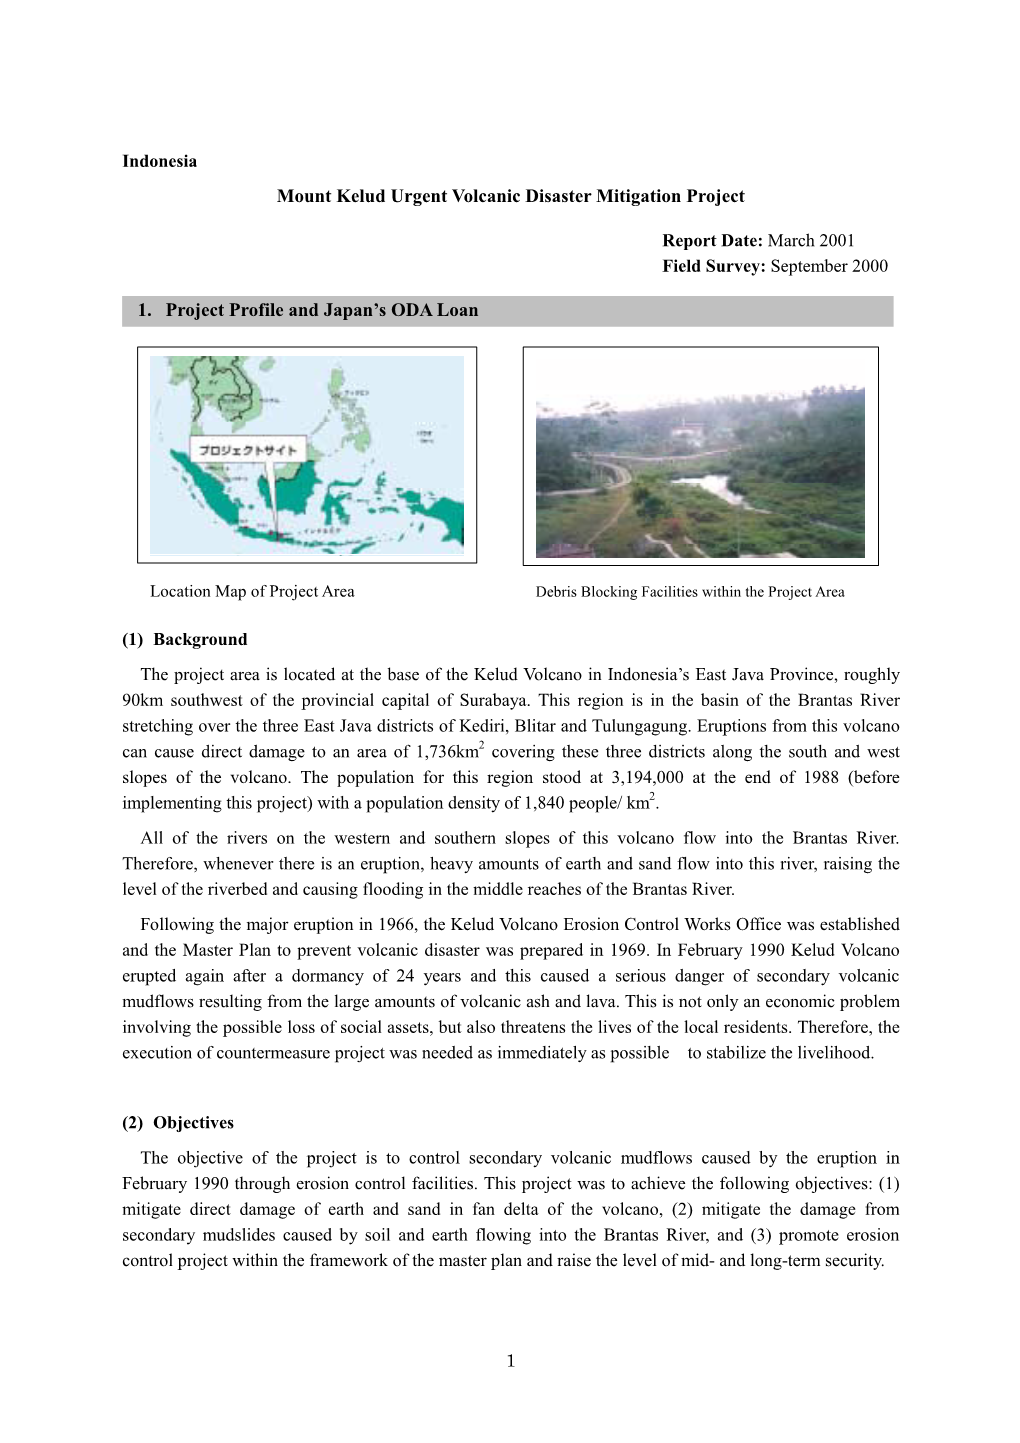 Mount Kelud Urgent Volcanic Disaster Mitigation Project 1. Project Profile